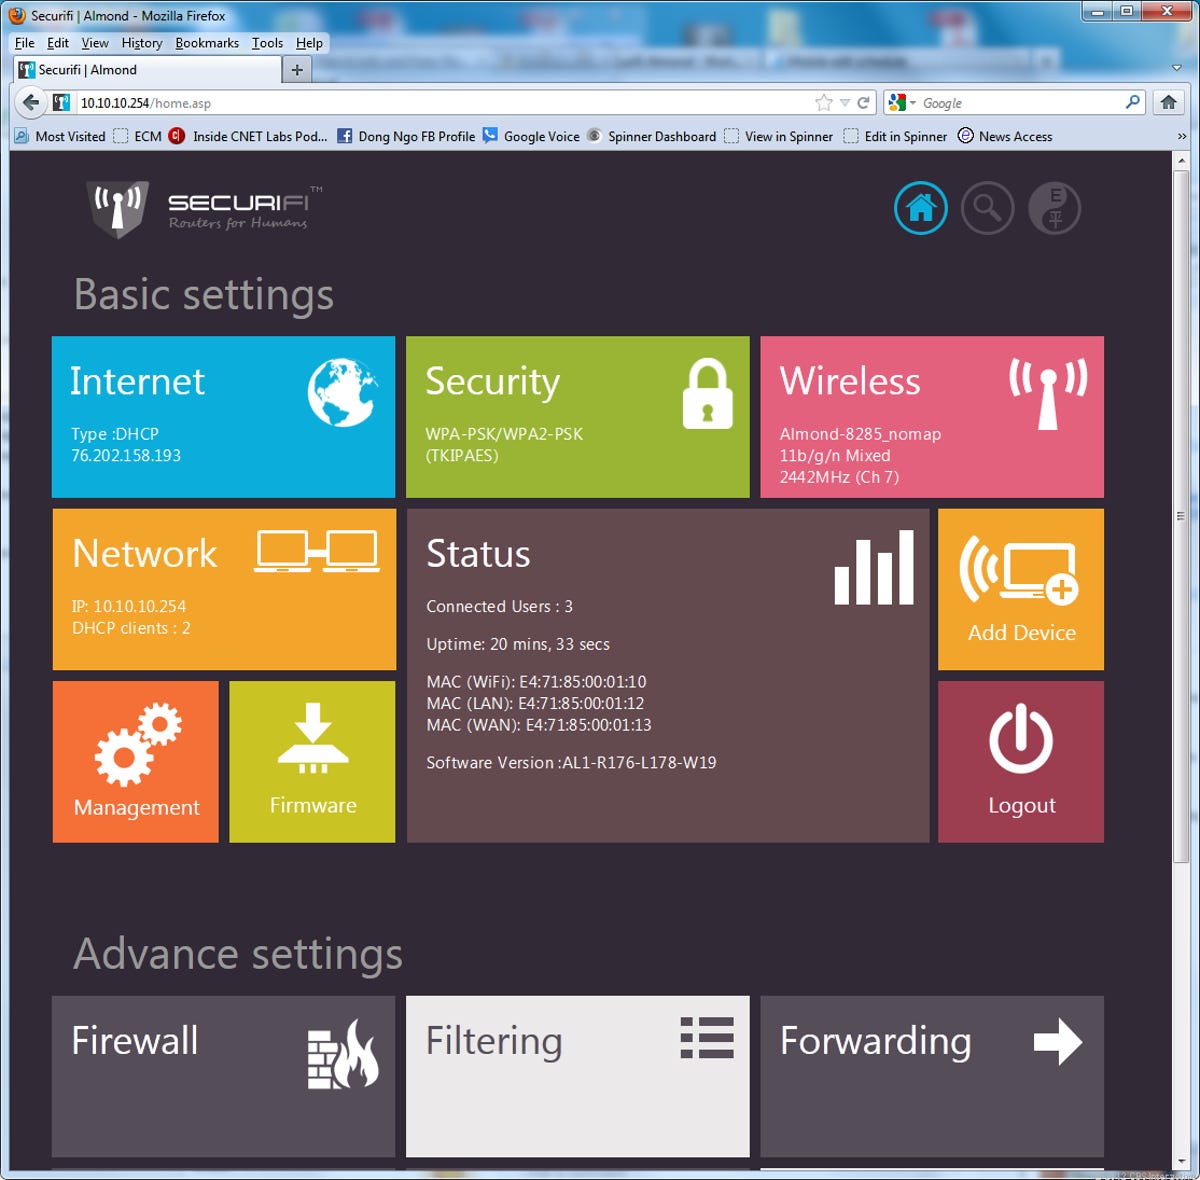 The Almond's interface resemble the Metro interface of Windows 8.